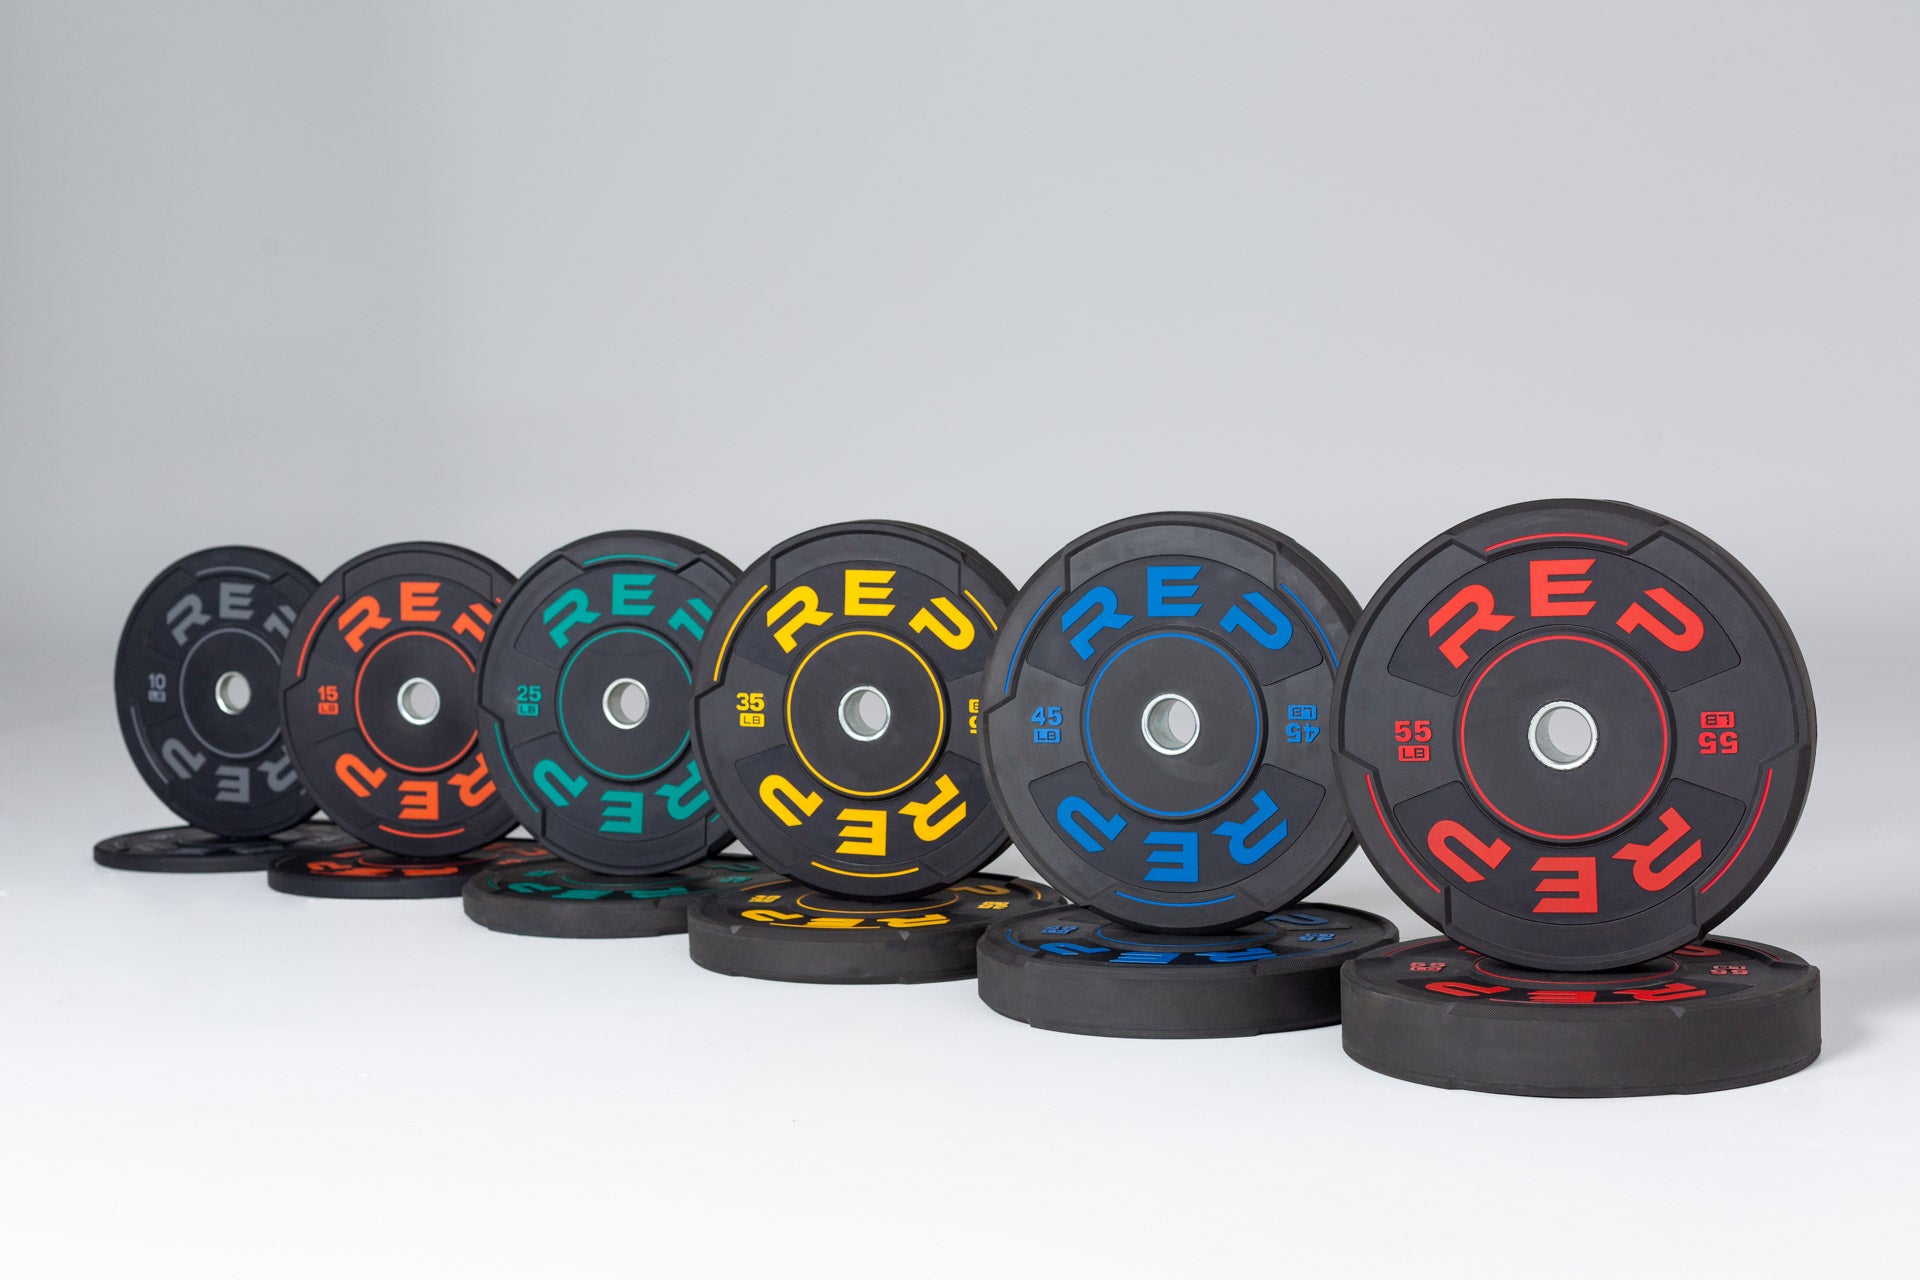 Full set of Sport Bumper Plate Pairs: 10, 15, 25, 35, 45, and 55lb pairs.